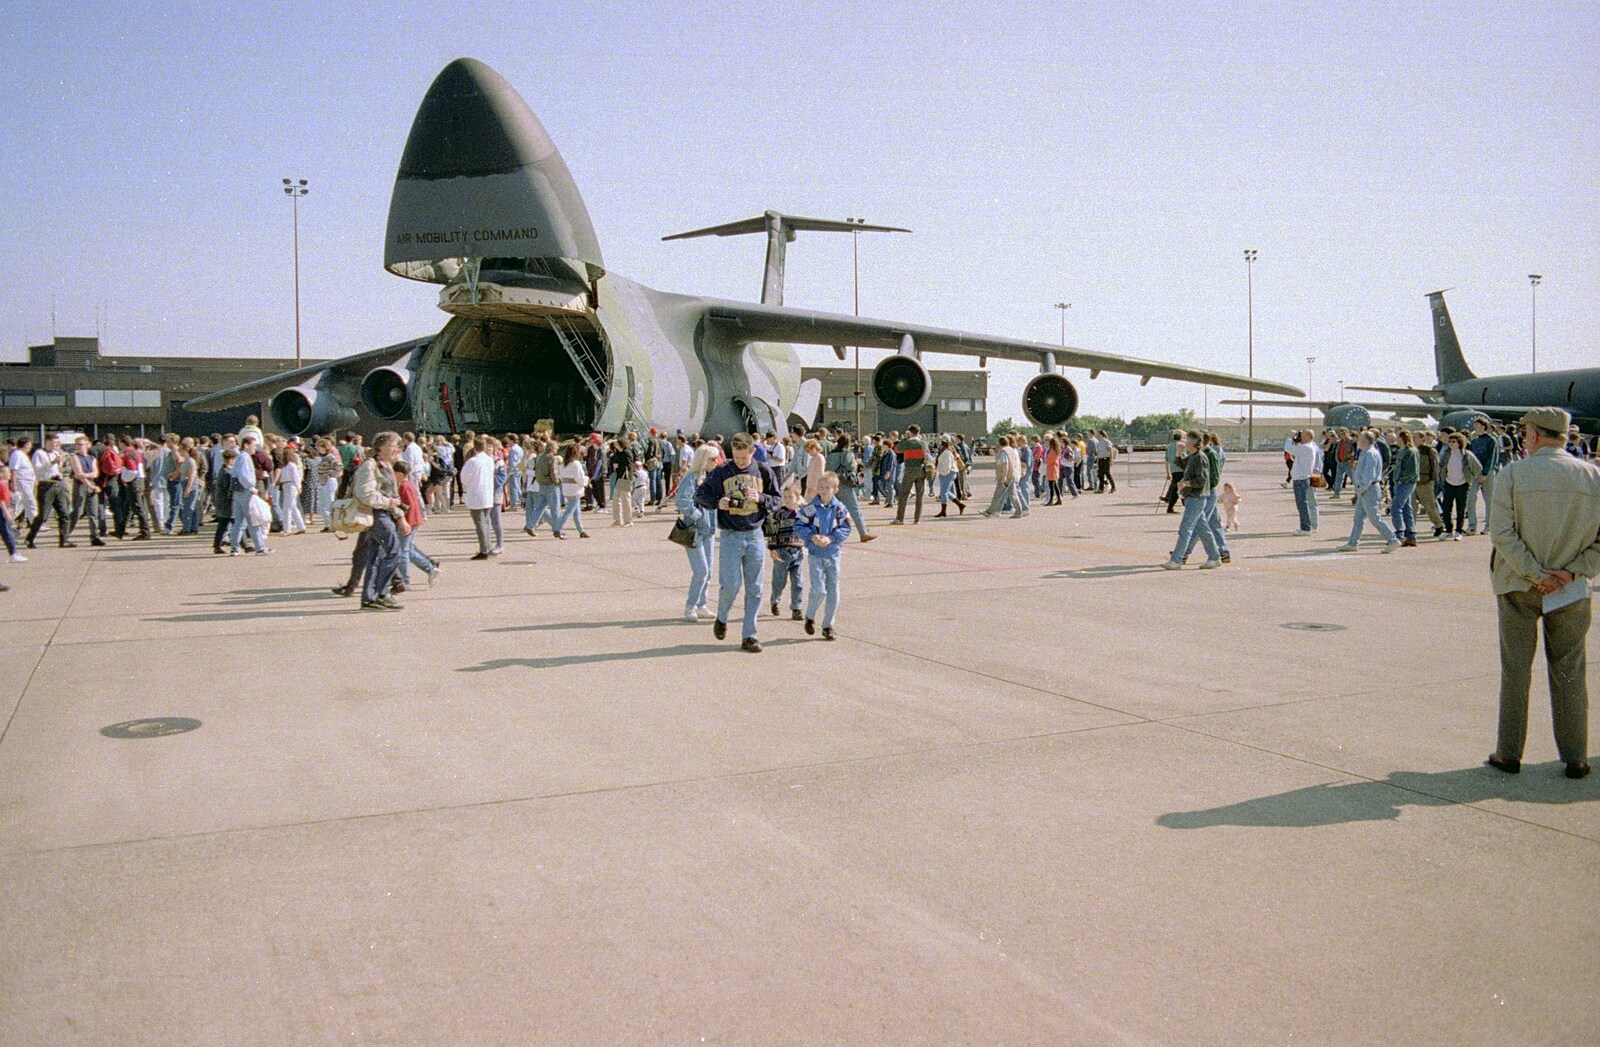 Crowds on the apron, near the C-5 from The Mildenhall Air Fete, Mildenhall, Suffolk - 29th May 1994